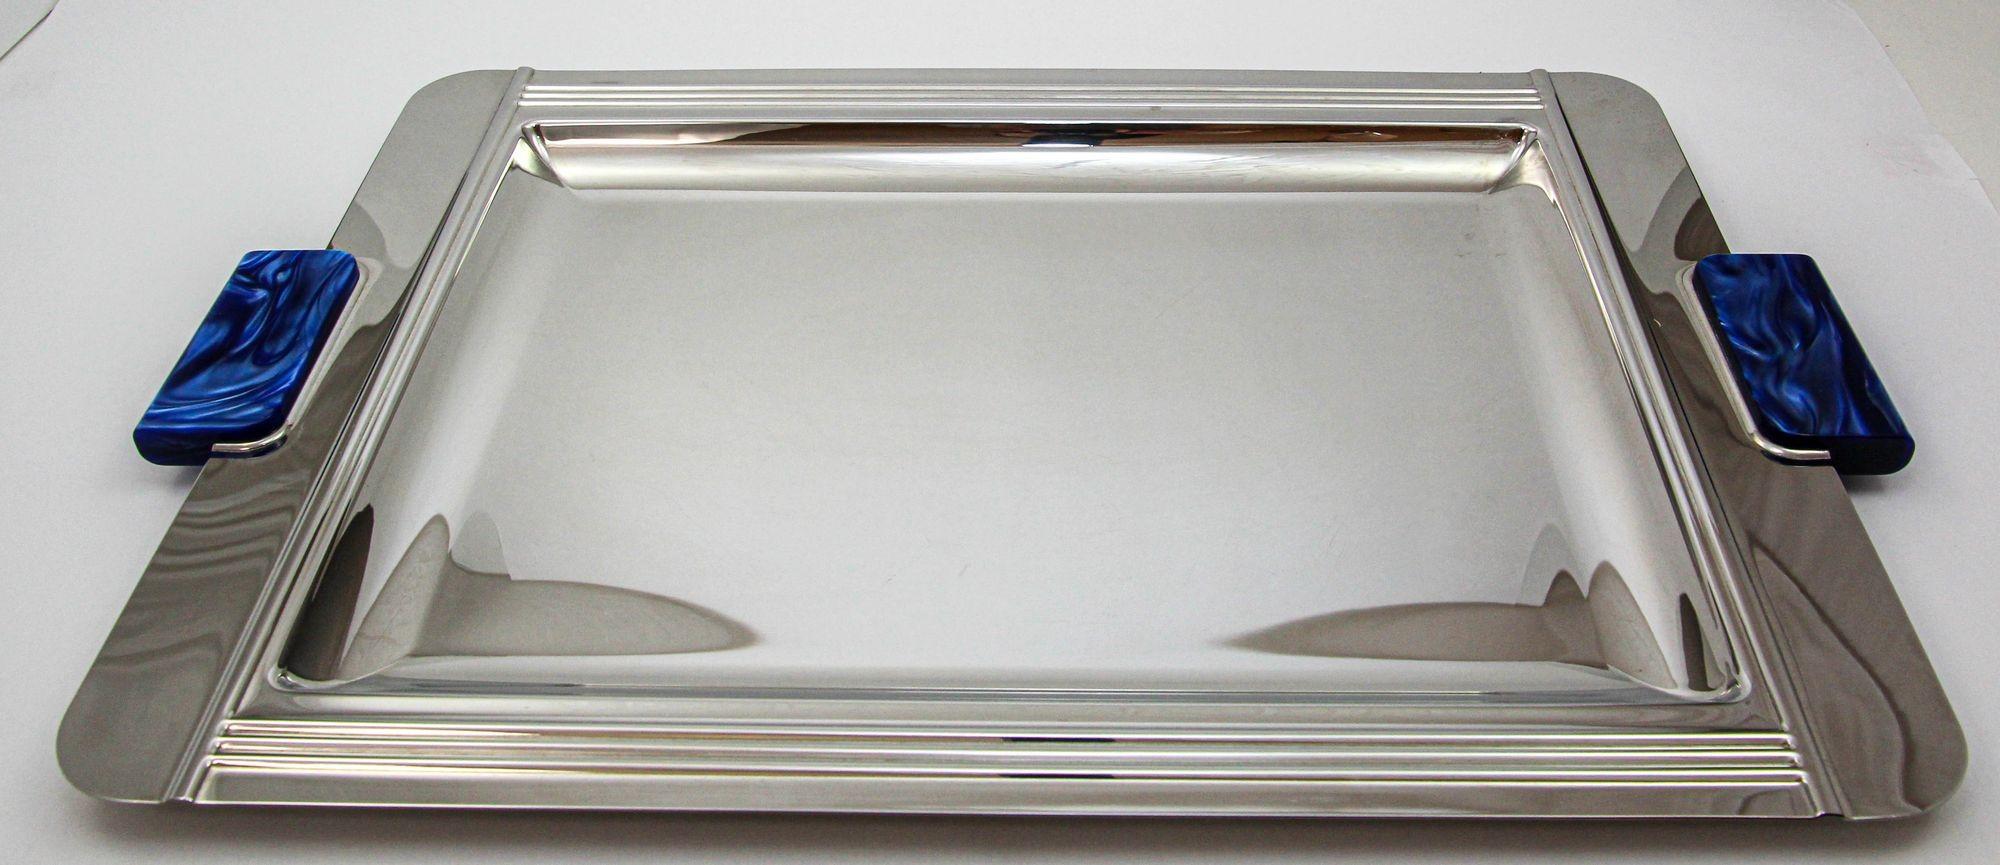 French Art Deco stainless steel serving tray by Couzon, France.
Vintage Jean Couzon Acier Inox 10/18 France Stainless Steel Serving Tray with Marbled Blue Resin Handles.
A beautiful large and heavy serving or barware tray.
This gorgeous polished